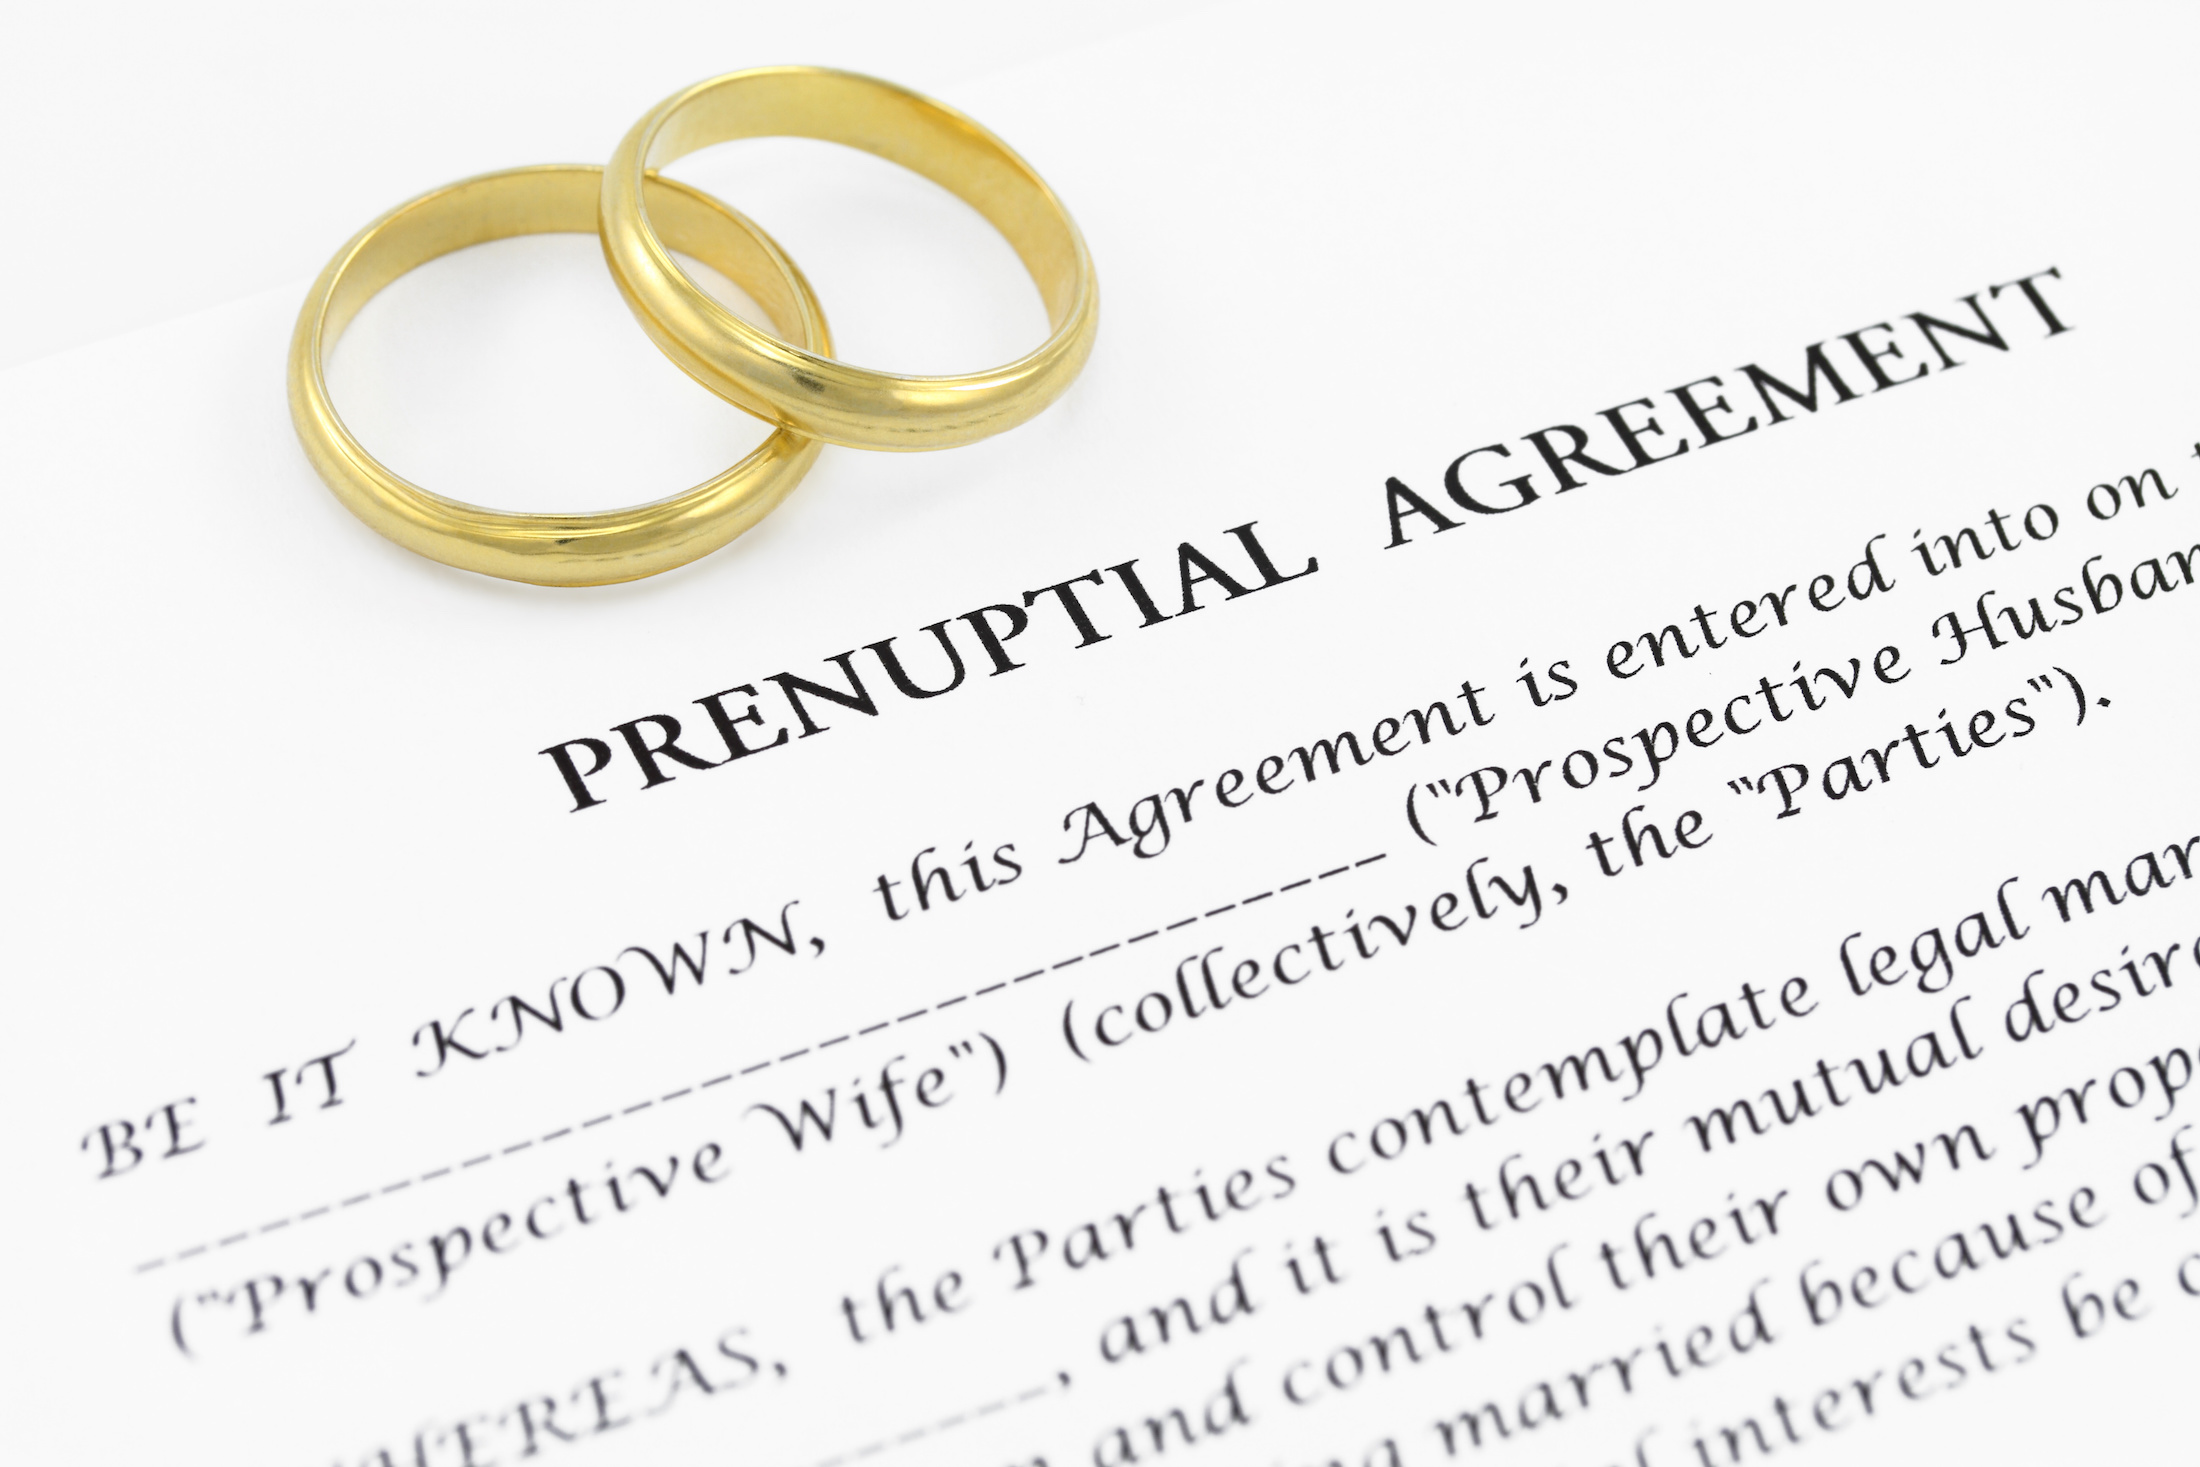 New York Prenup Attorney Discusses Temporary Spousal Support